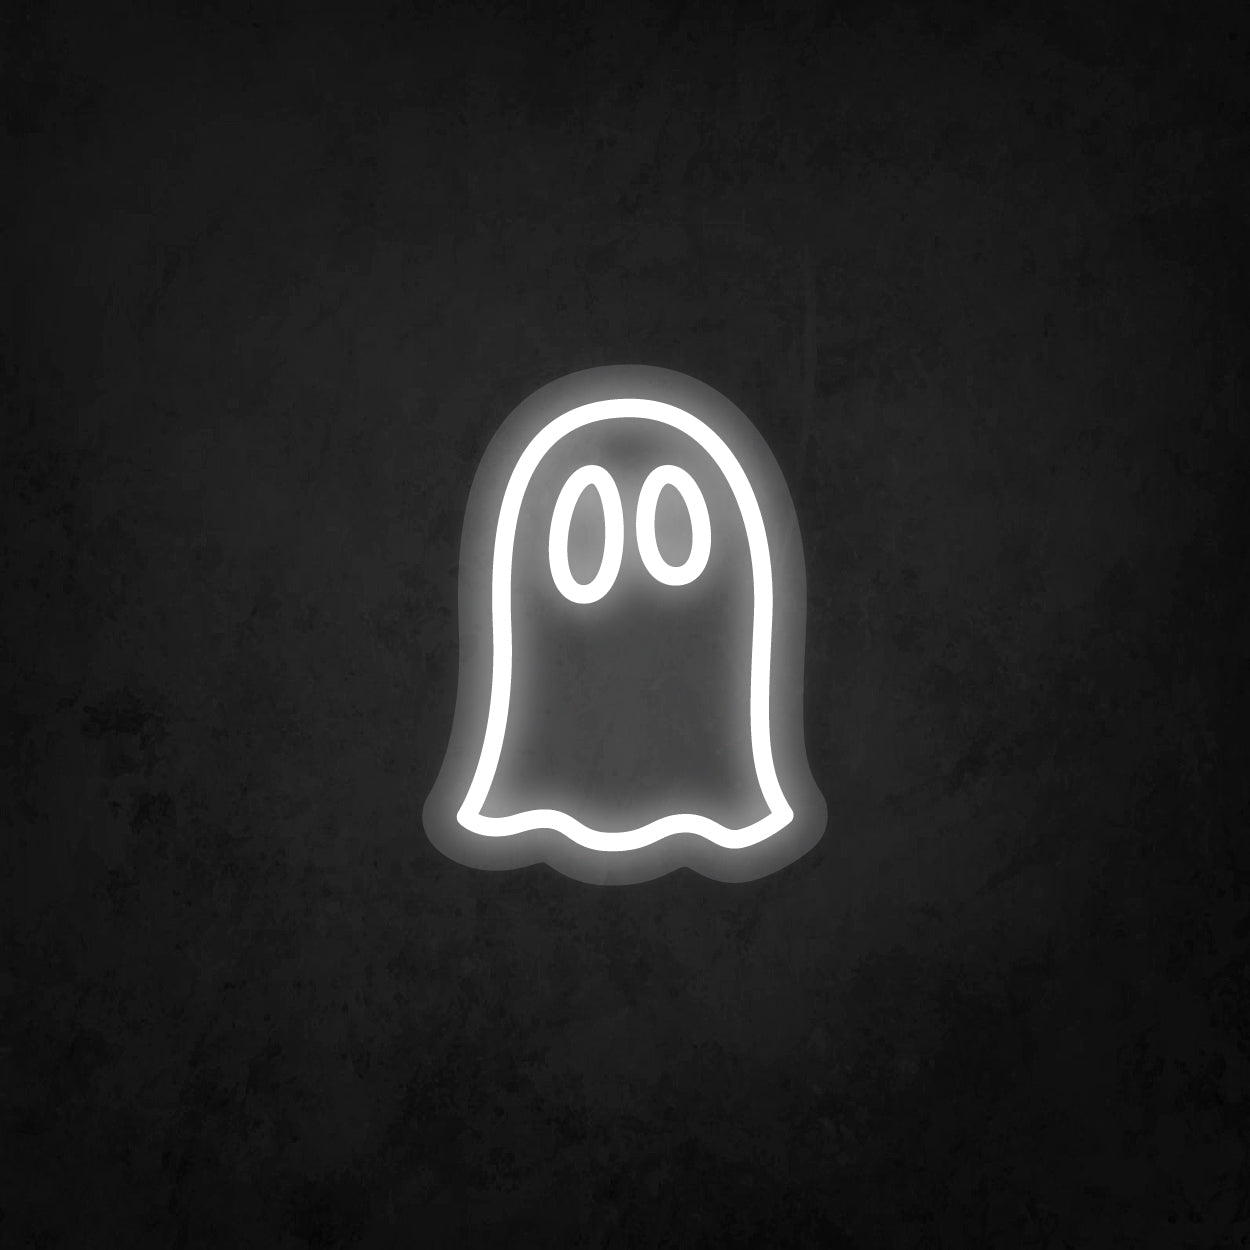 LED Neon Sign - Ghosted Friend A